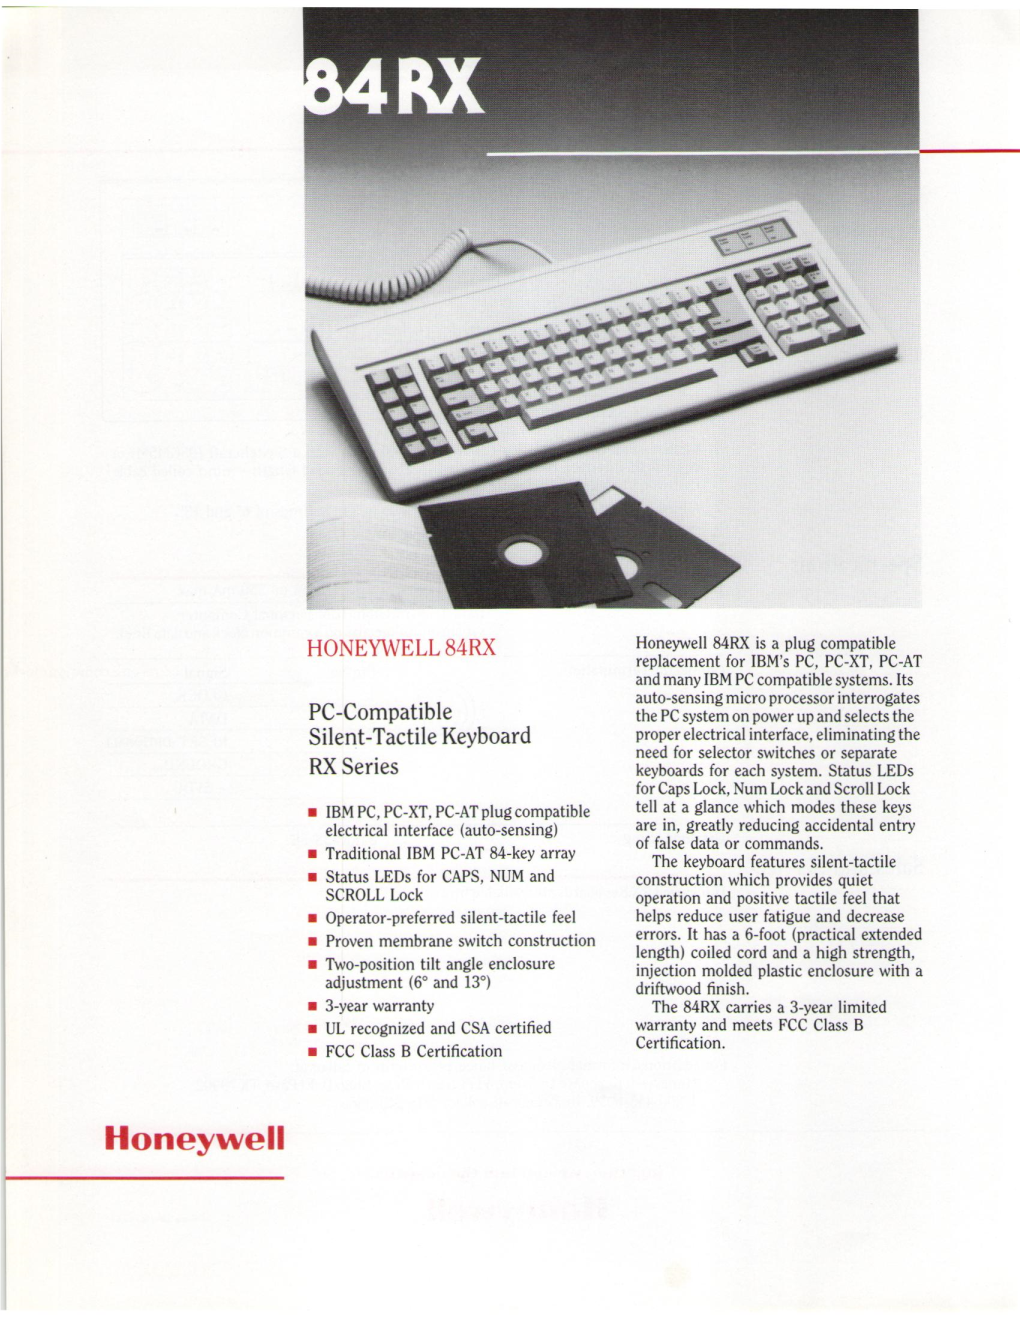 HONEYWELL 84RX Honeywell 84RX Is a Plug Compatible Replacement for IBM's PC, PC-XT, PC-AT and Many IBM PC Compatible Systems